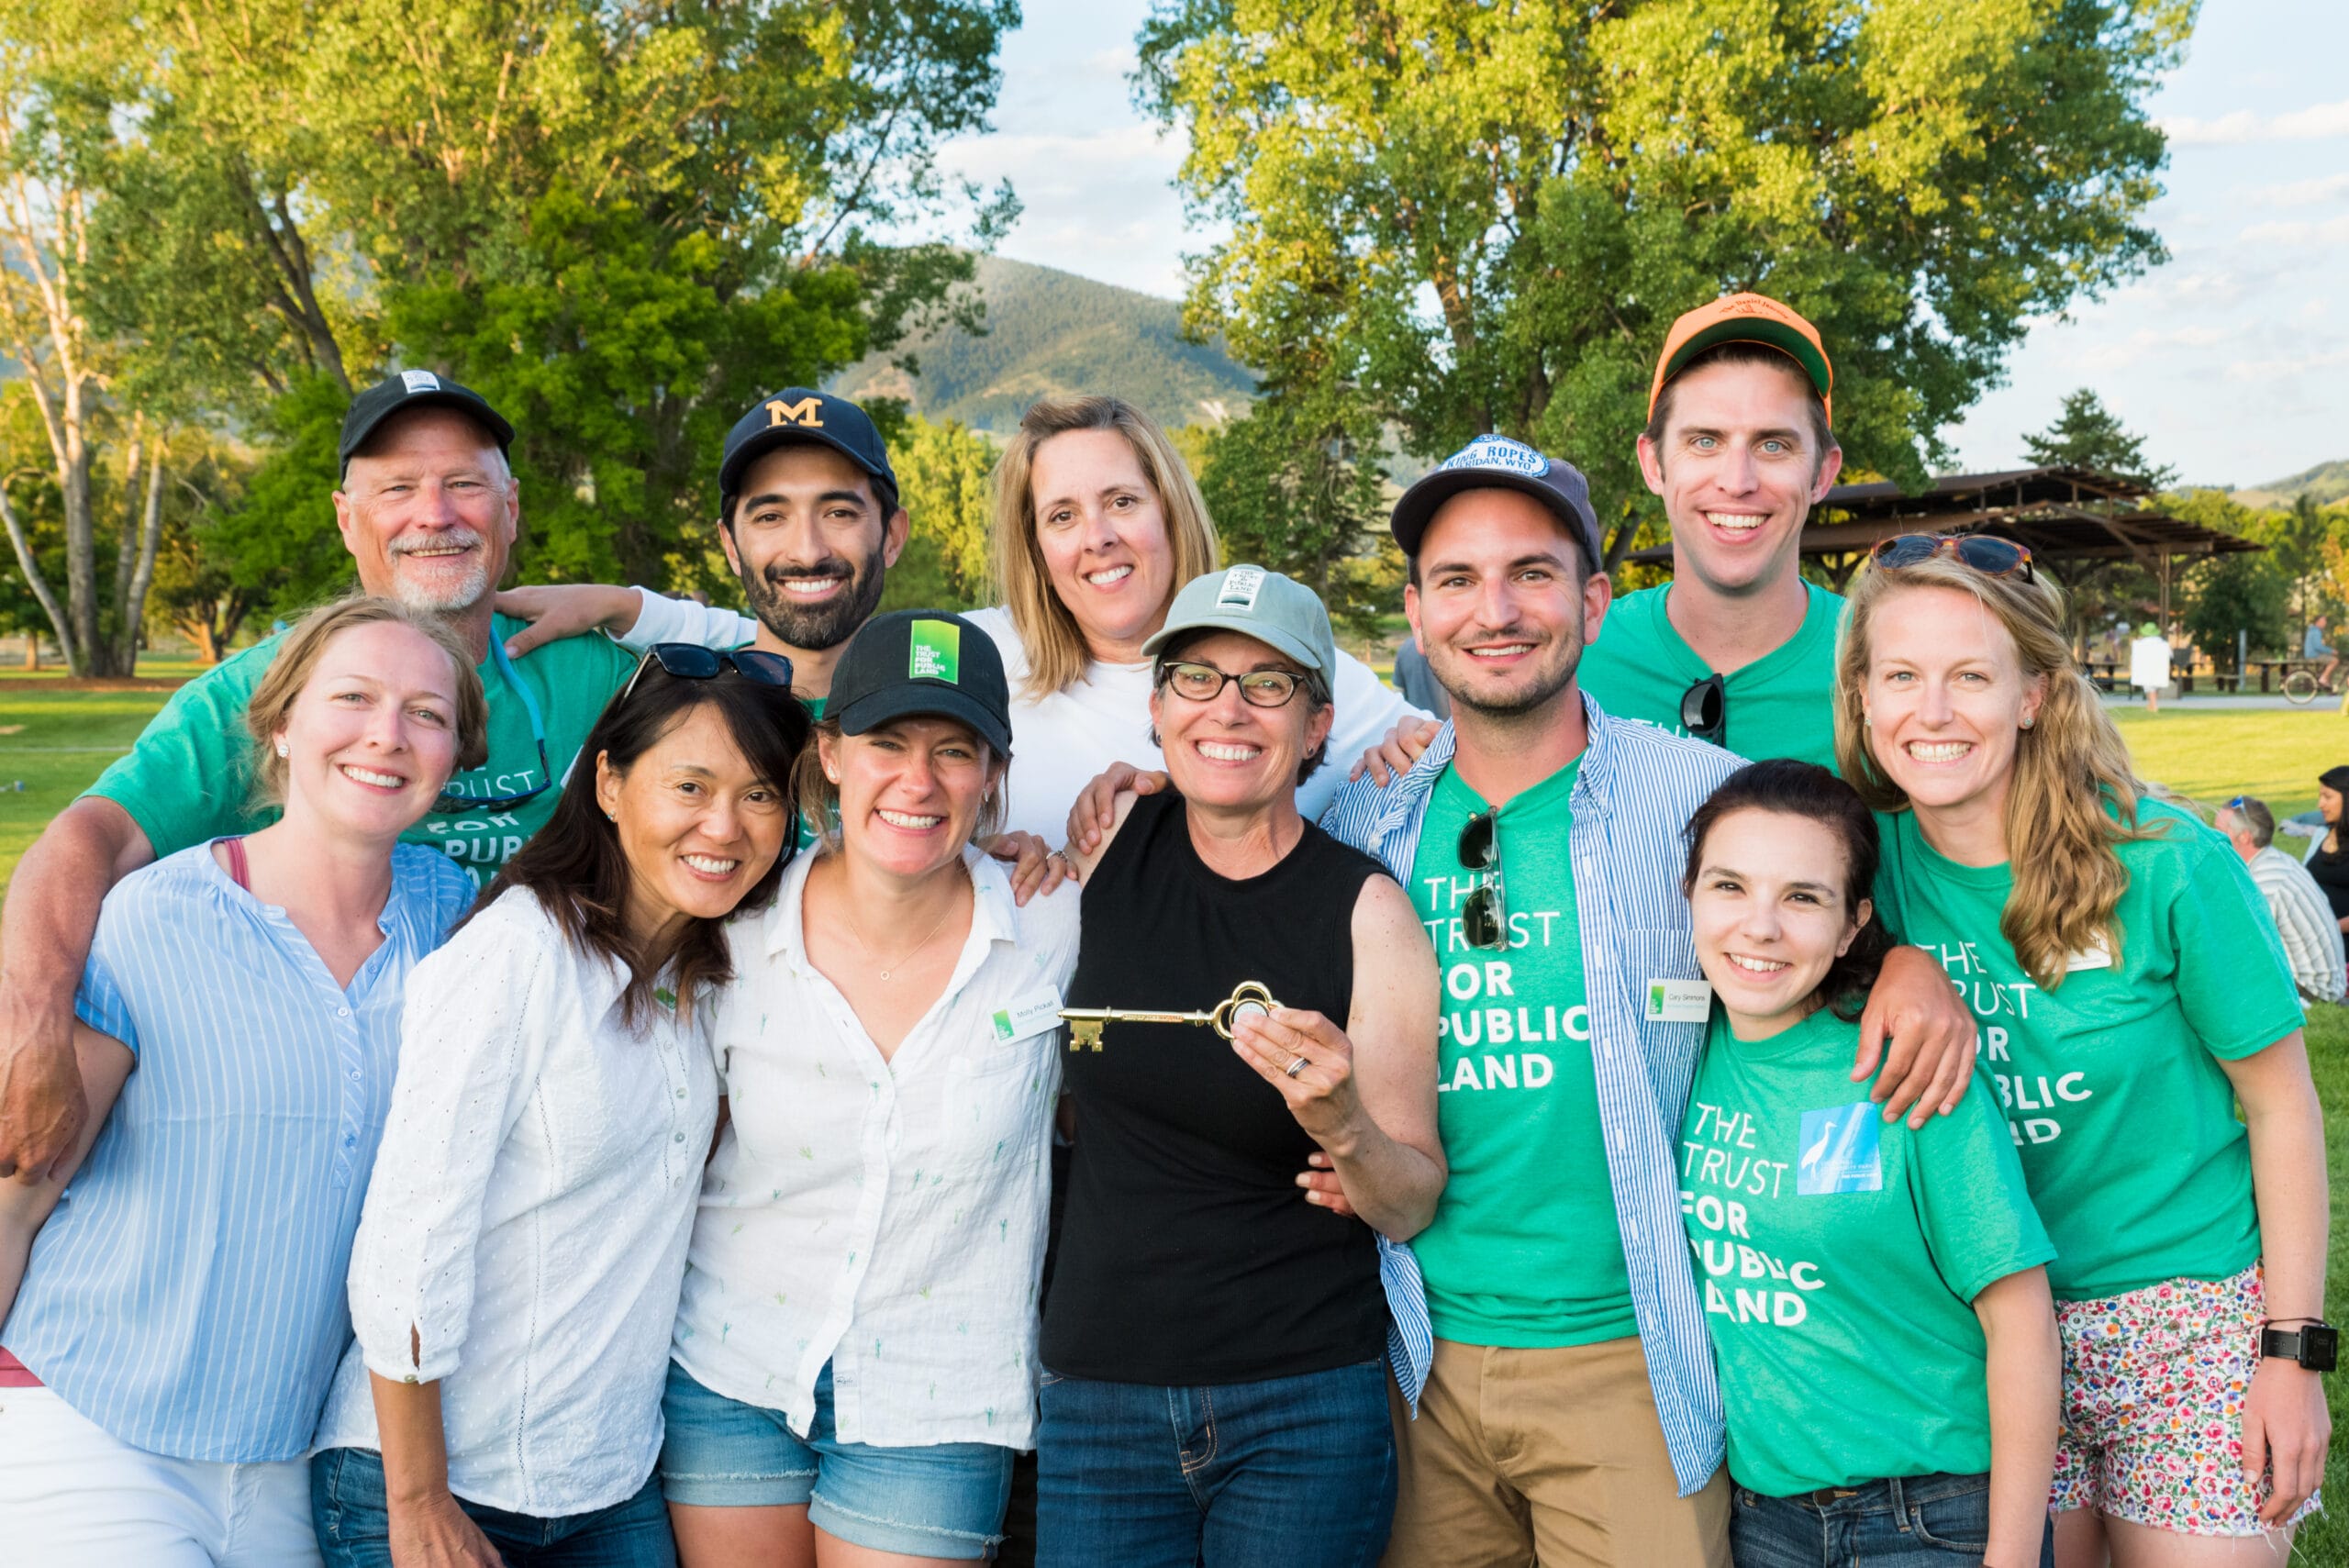 A group of people in green shirts posing for a photo.